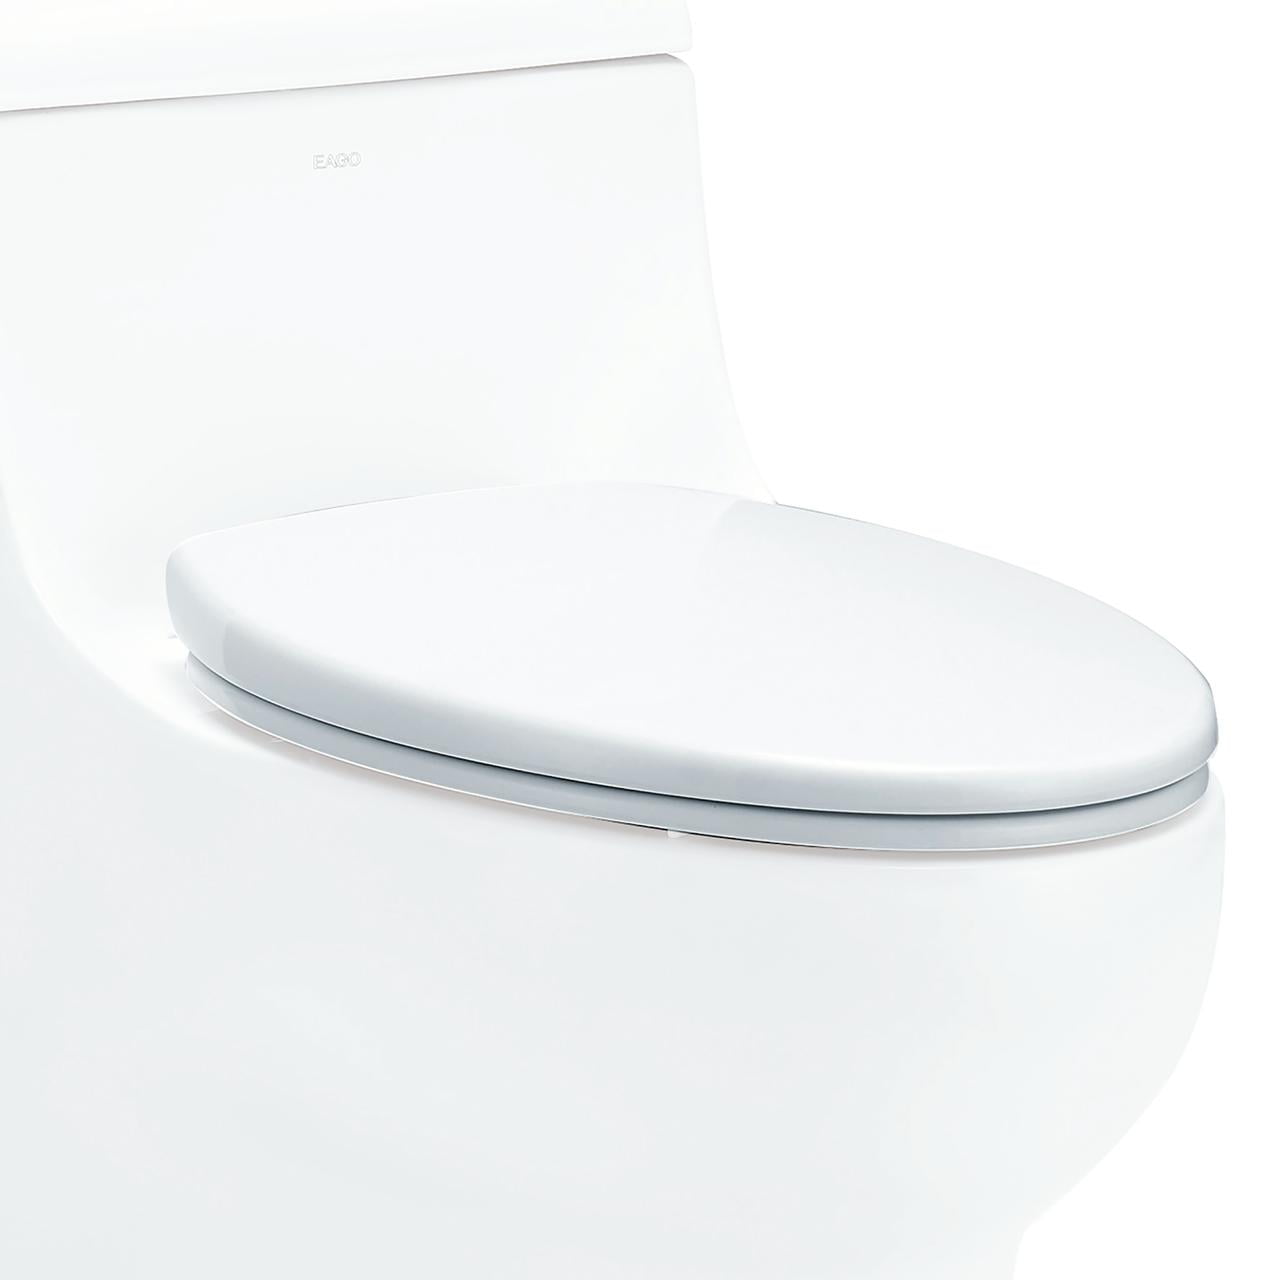 R-358seat Replacement Soft Closing Plastic Toilet Seat, White For Tb358